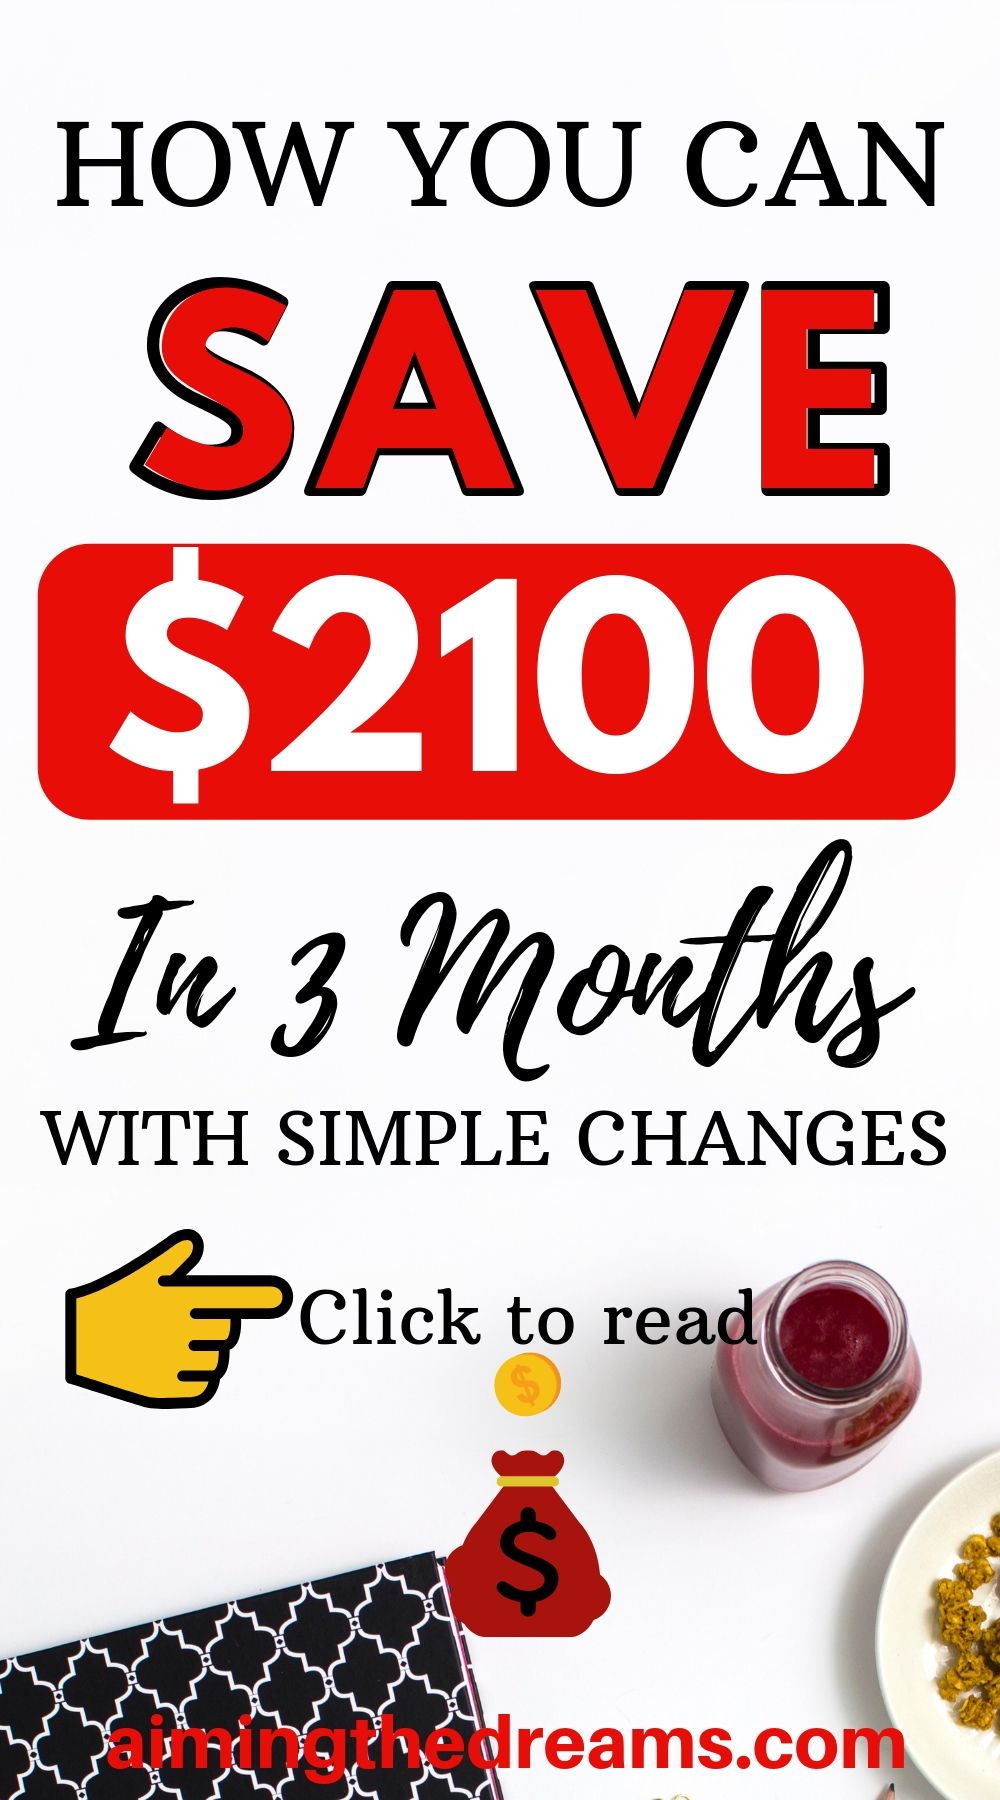 How you can save extra $2100 to grow wealth in 3 months time